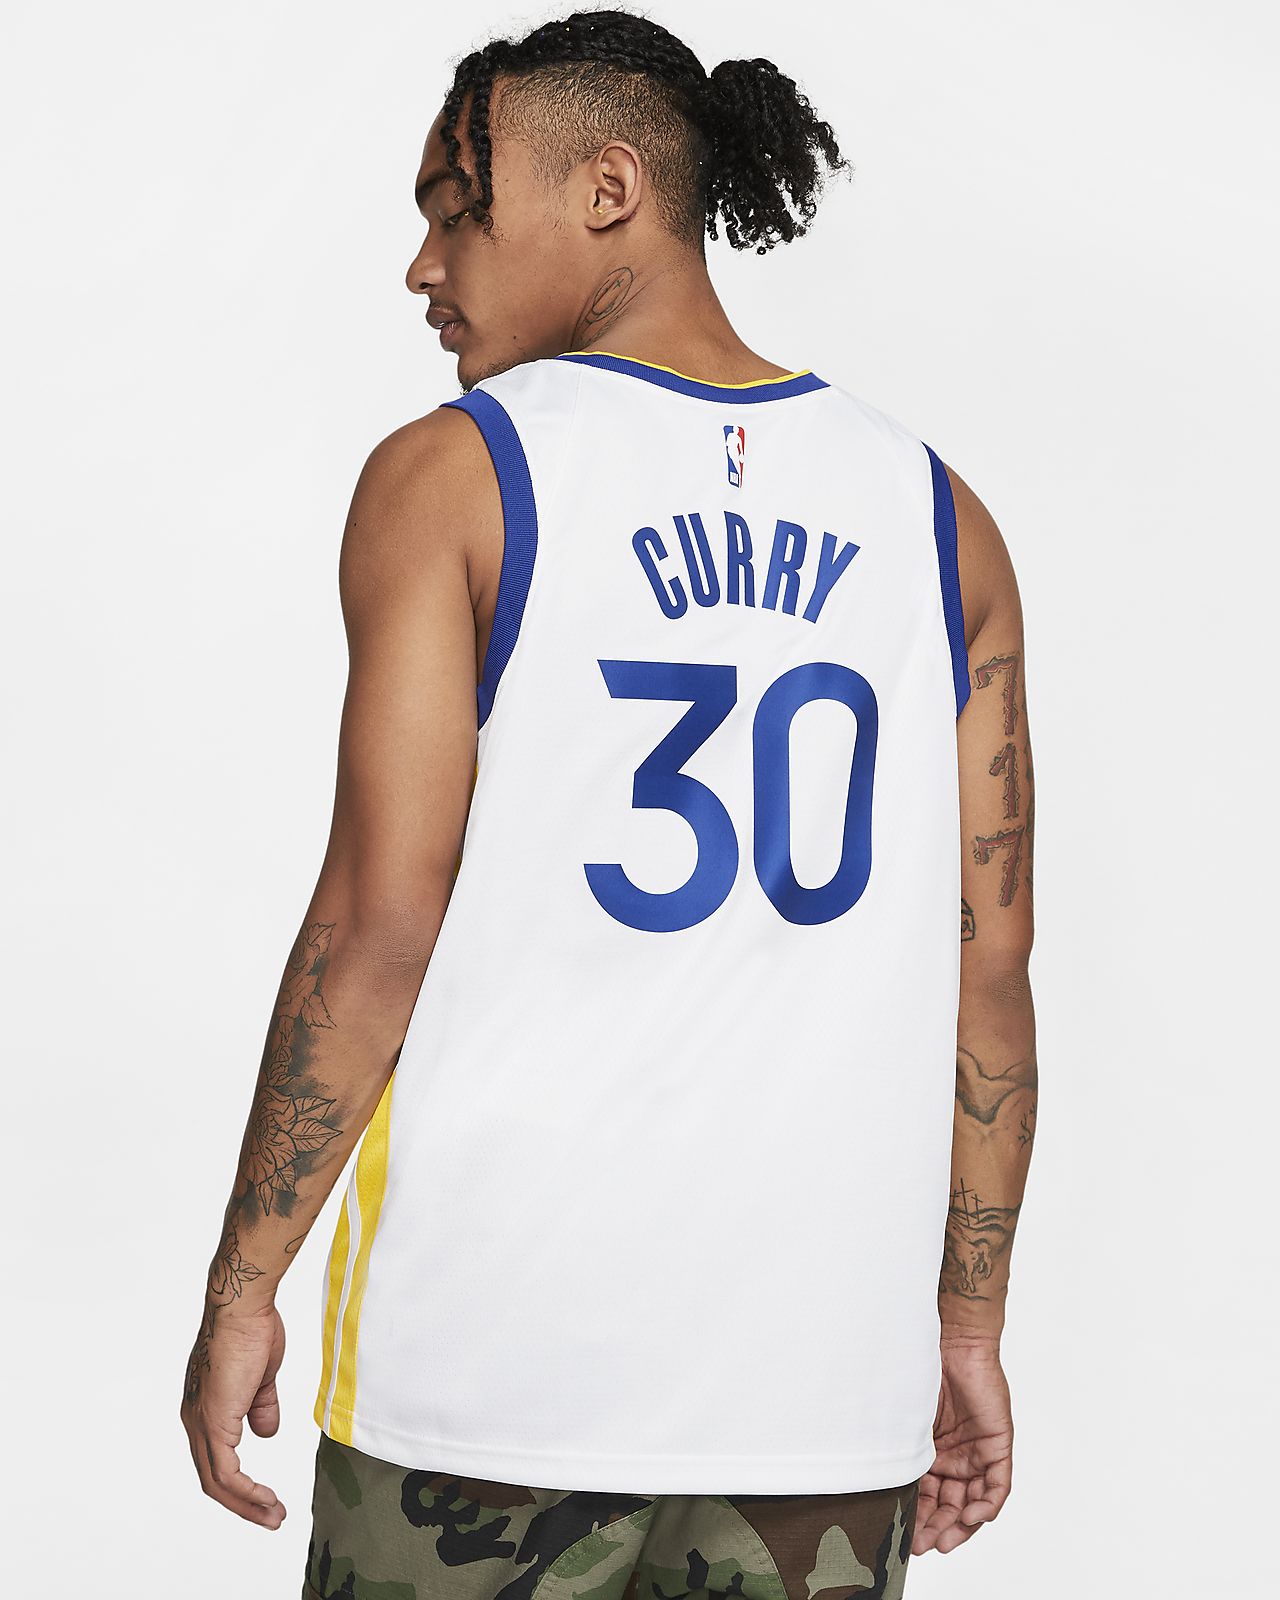 stephen curry jersey philippines for sale